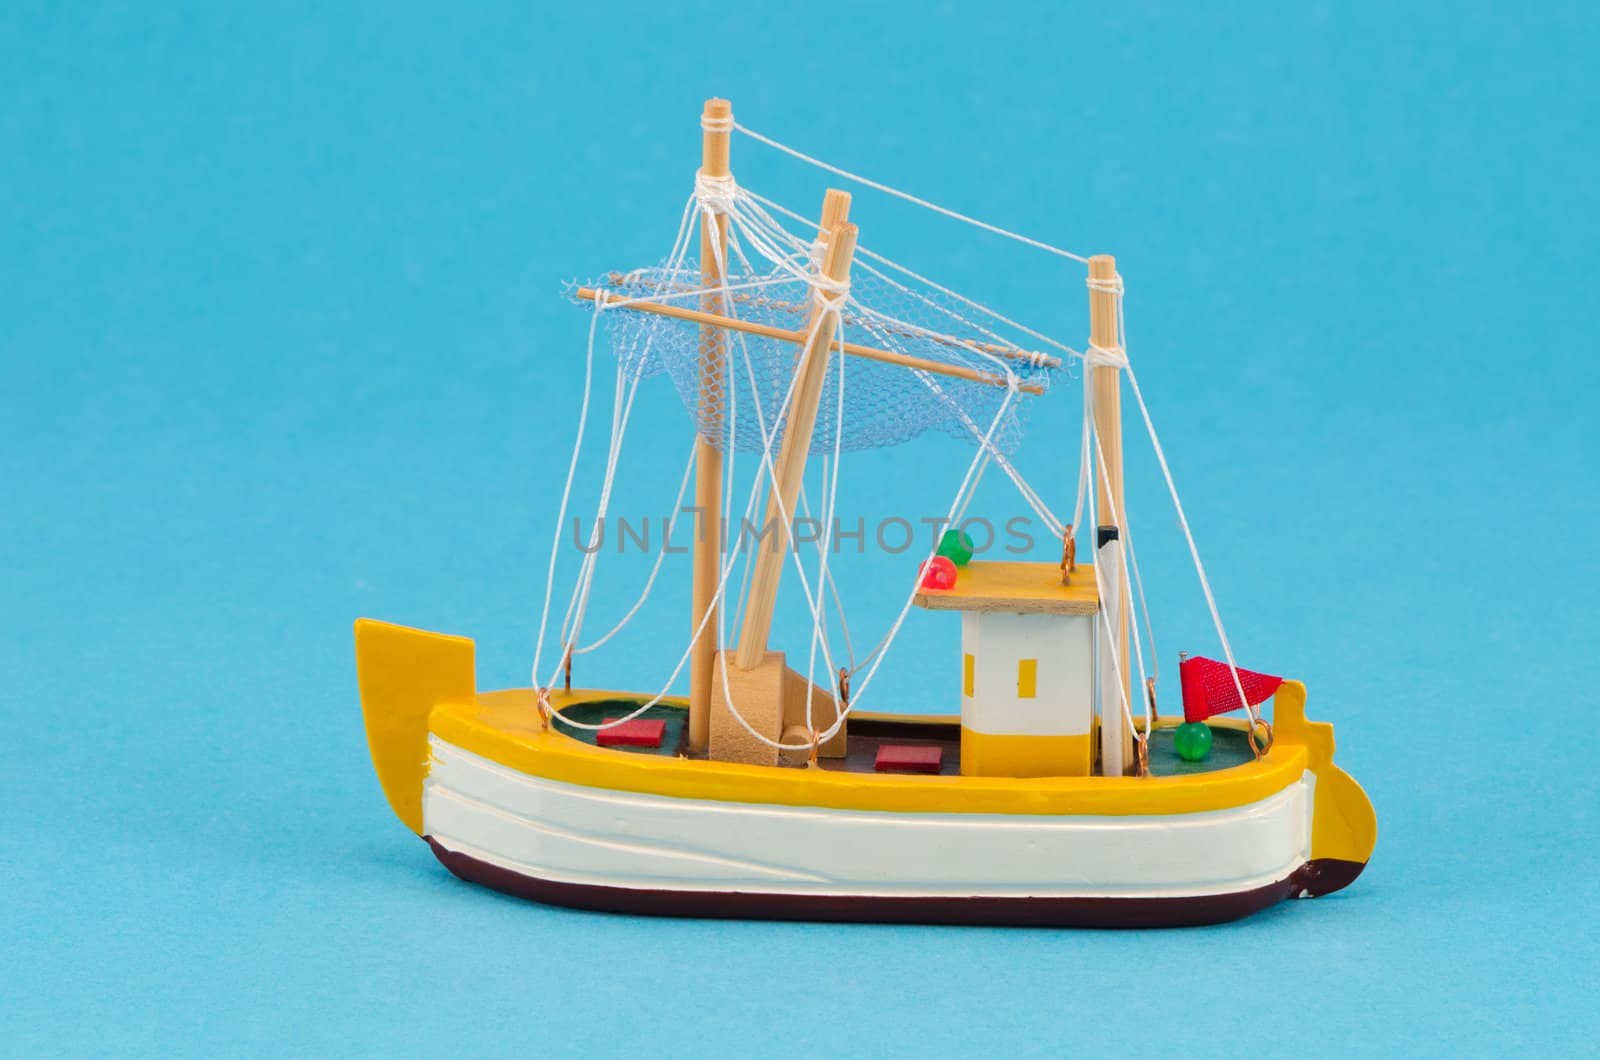 wooden handmade object boat ship with sail model decoration on blue background.